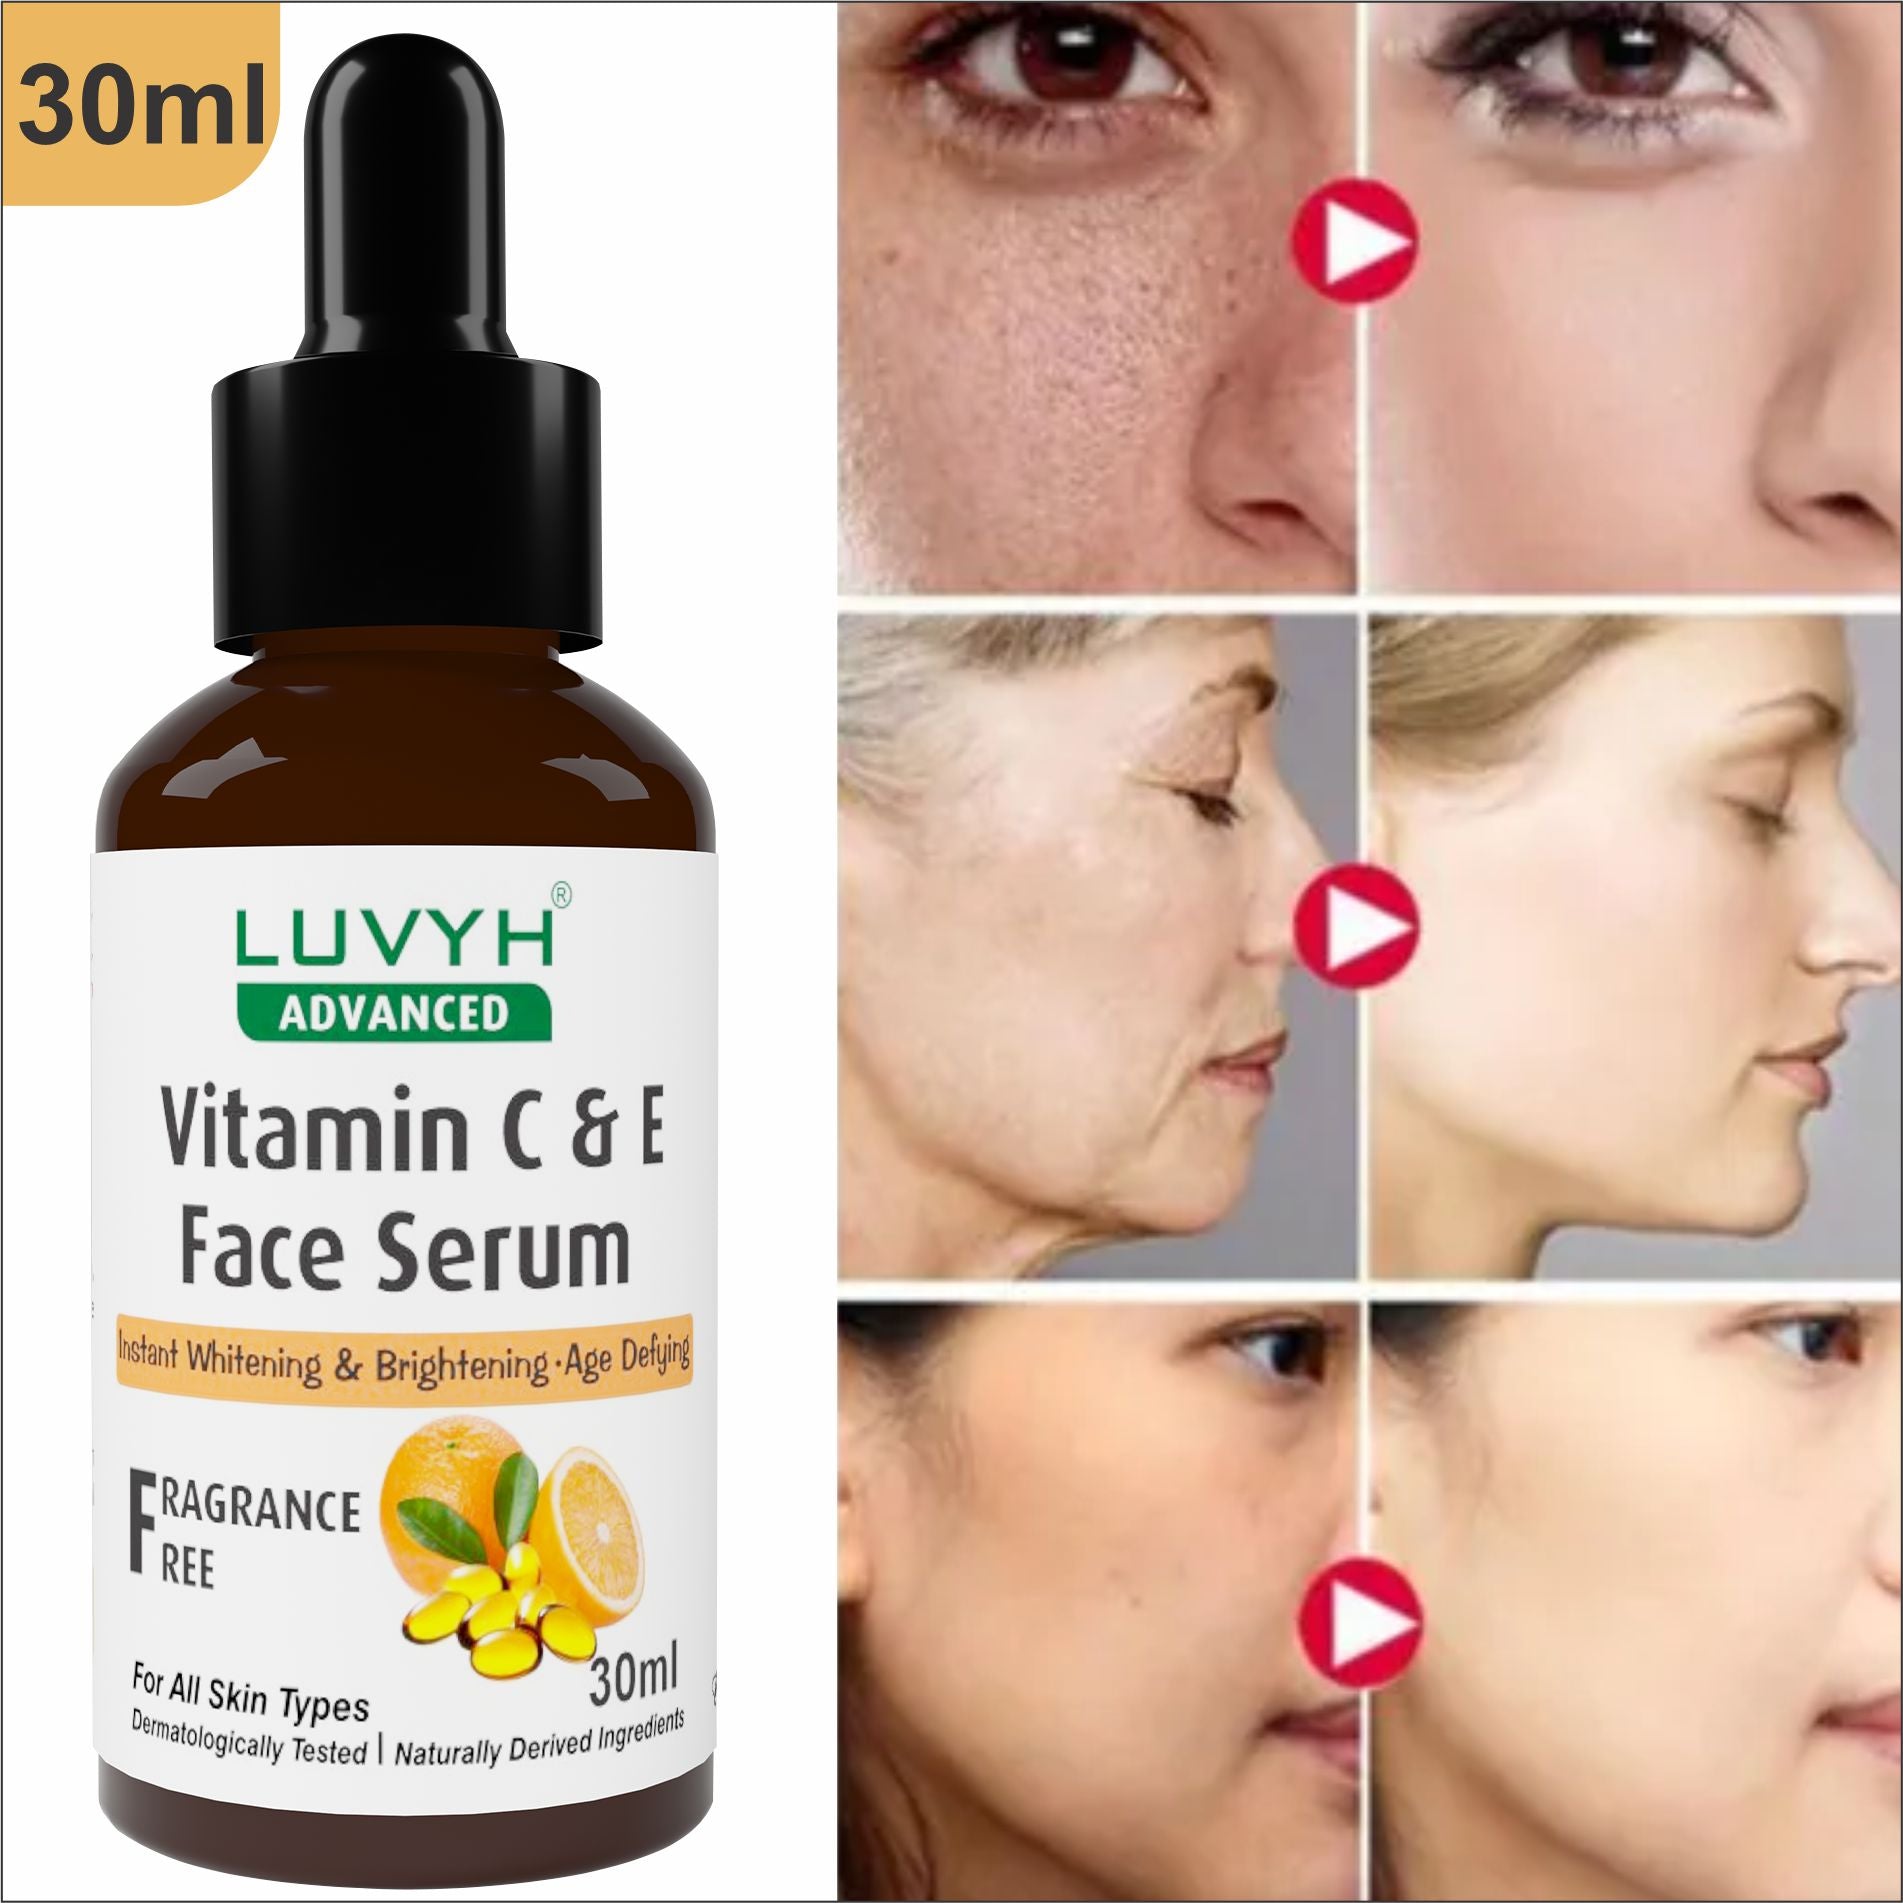 Before and After Results  Vitamin C & E Face Serum 